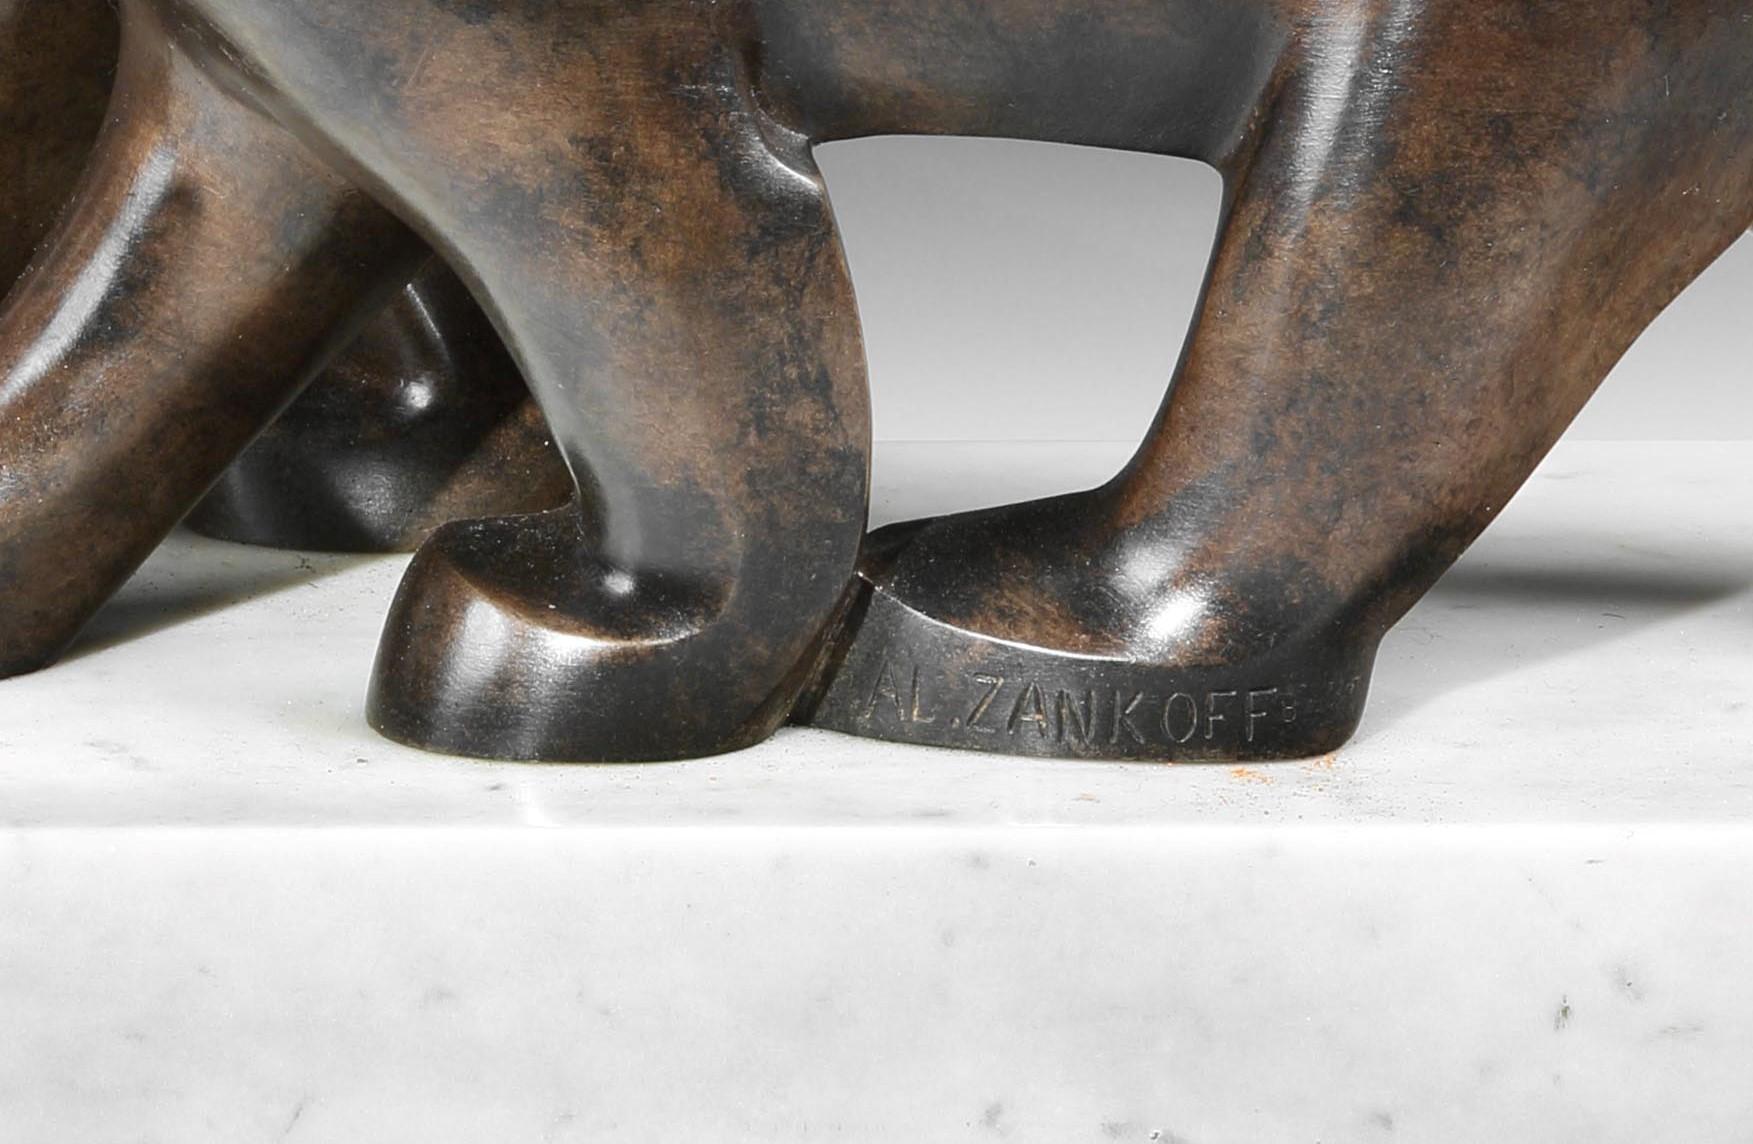 Alexandre Zankoff (Aleksander TZANKOV, signed AL.ZANKOFF)

A very fine Art Deco bronze of two polar bears walking side by side, the animals with all-original patina set on a deep white marble plinth. Cast by the foundry of Marcel Guillemard, the